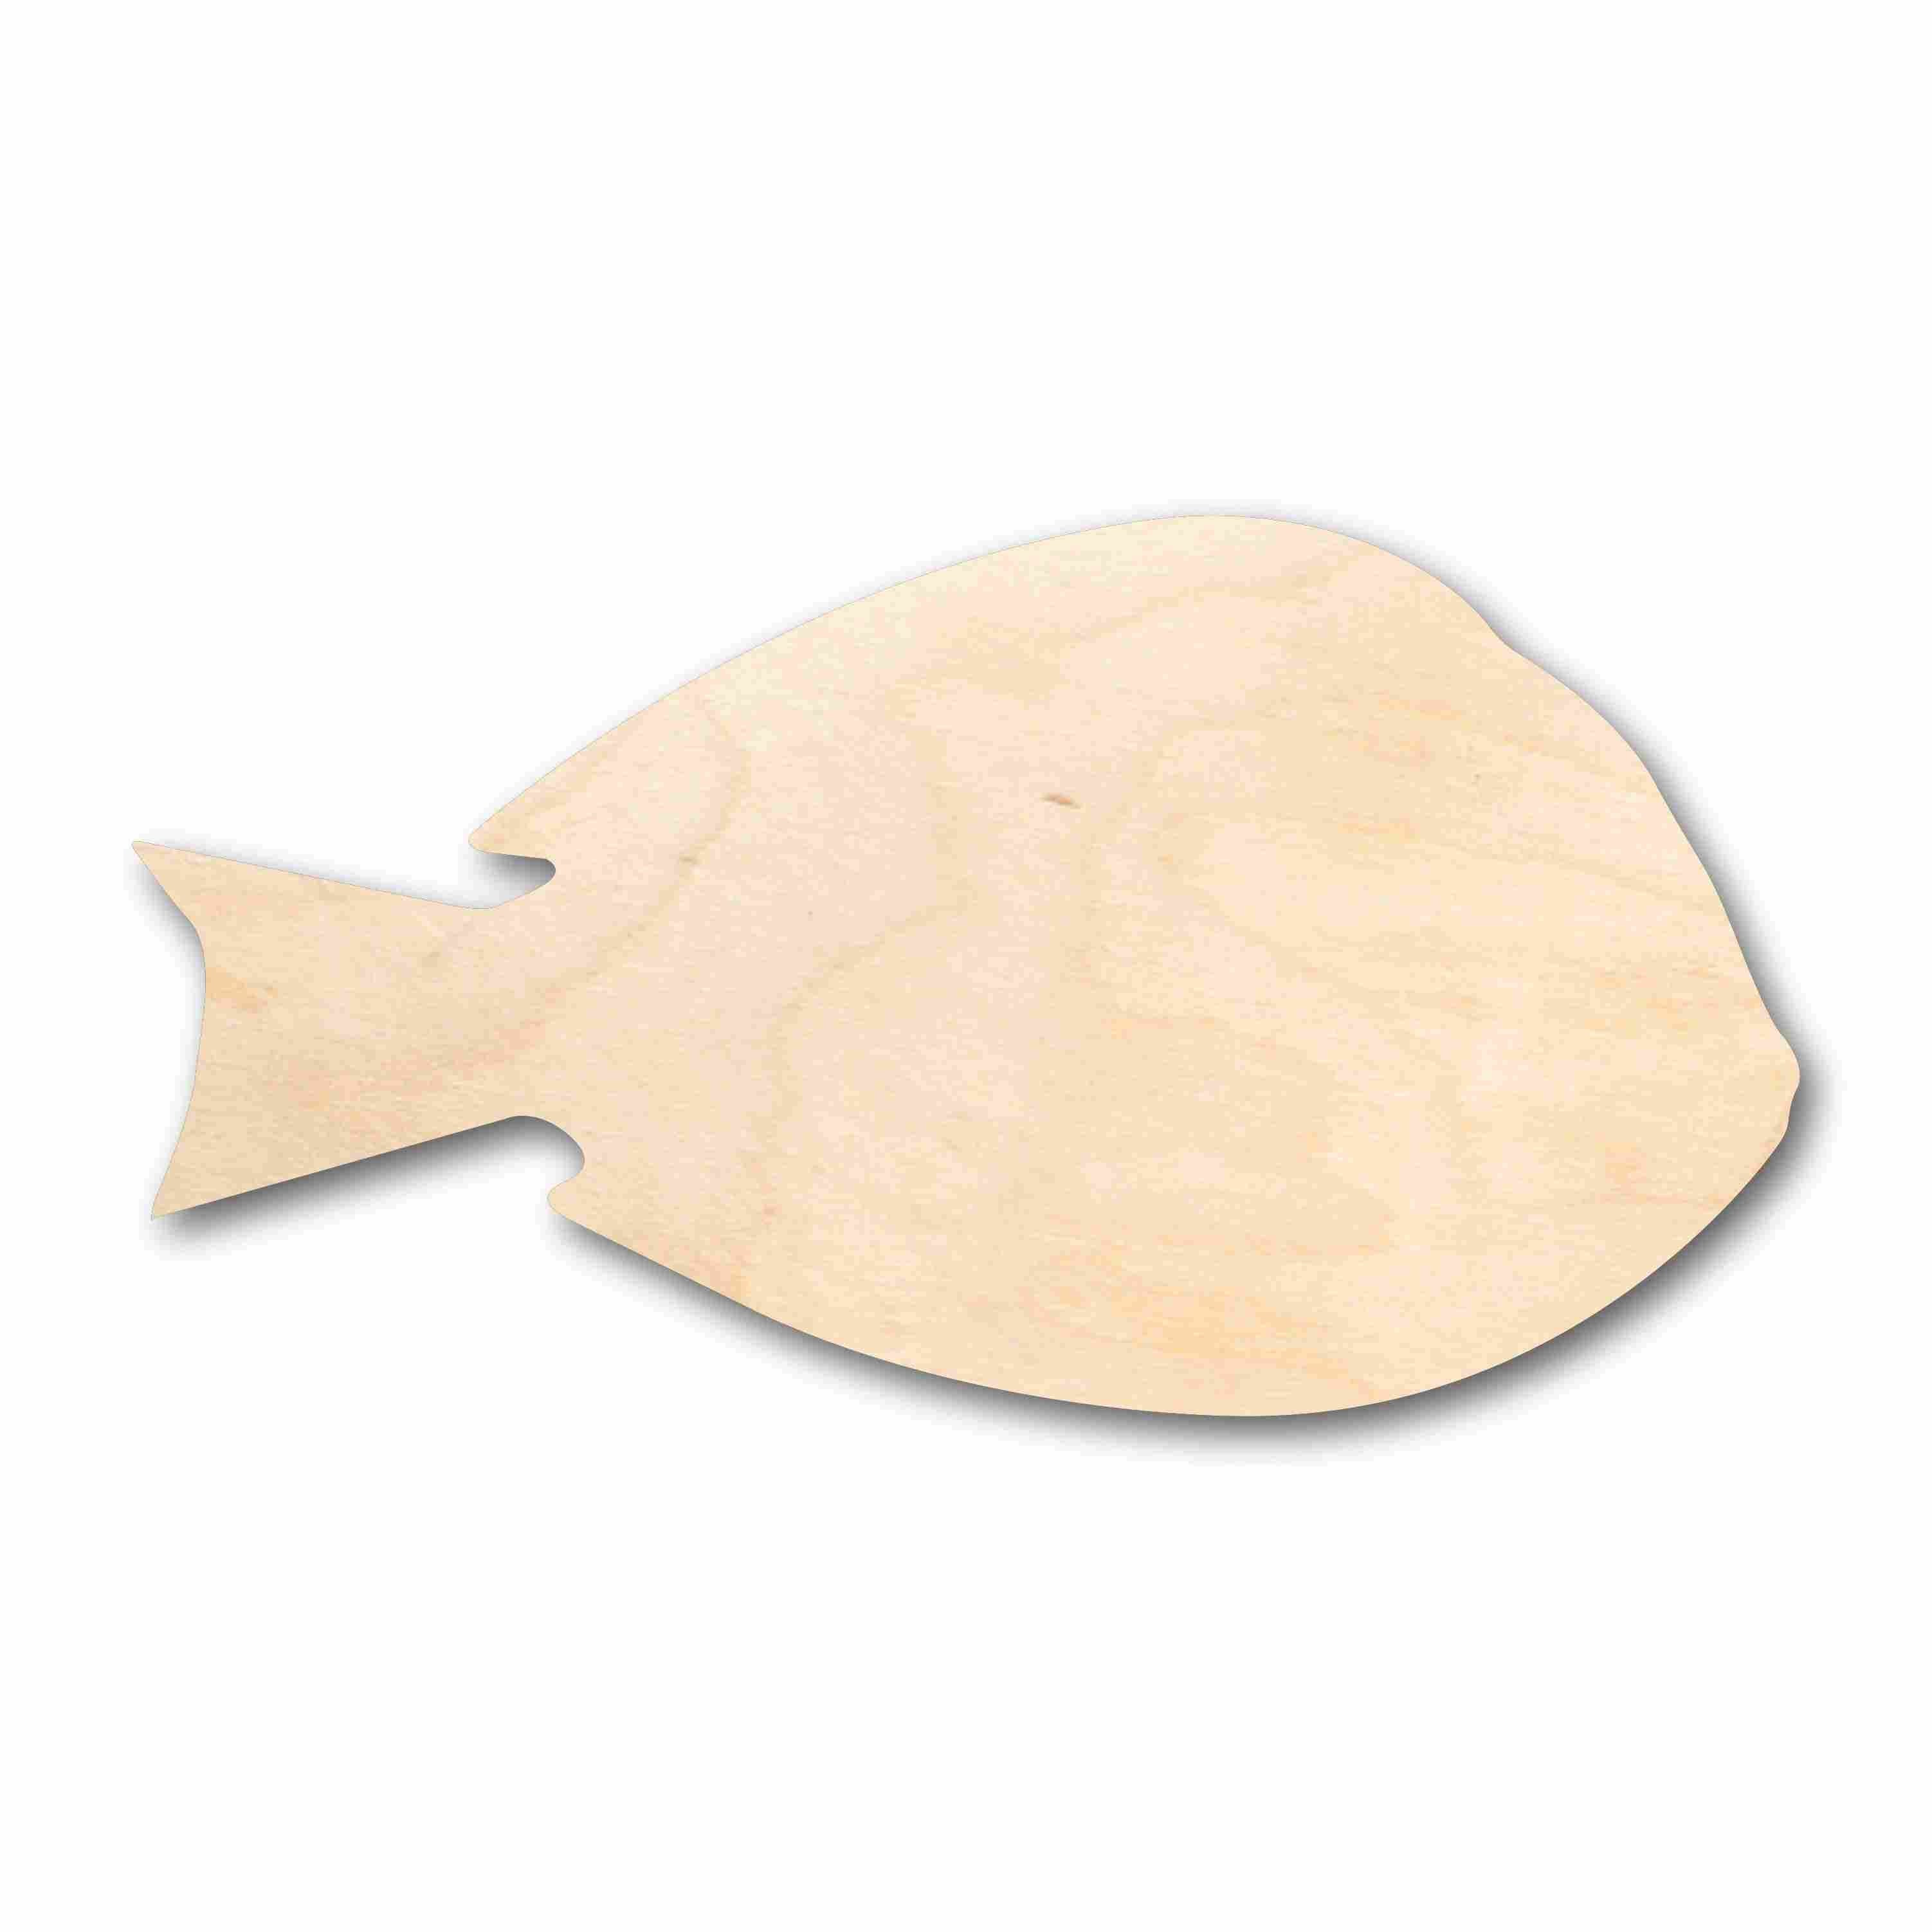 Unfinished Wood Blue Tang Fish Silhouette - Craft- up to 24